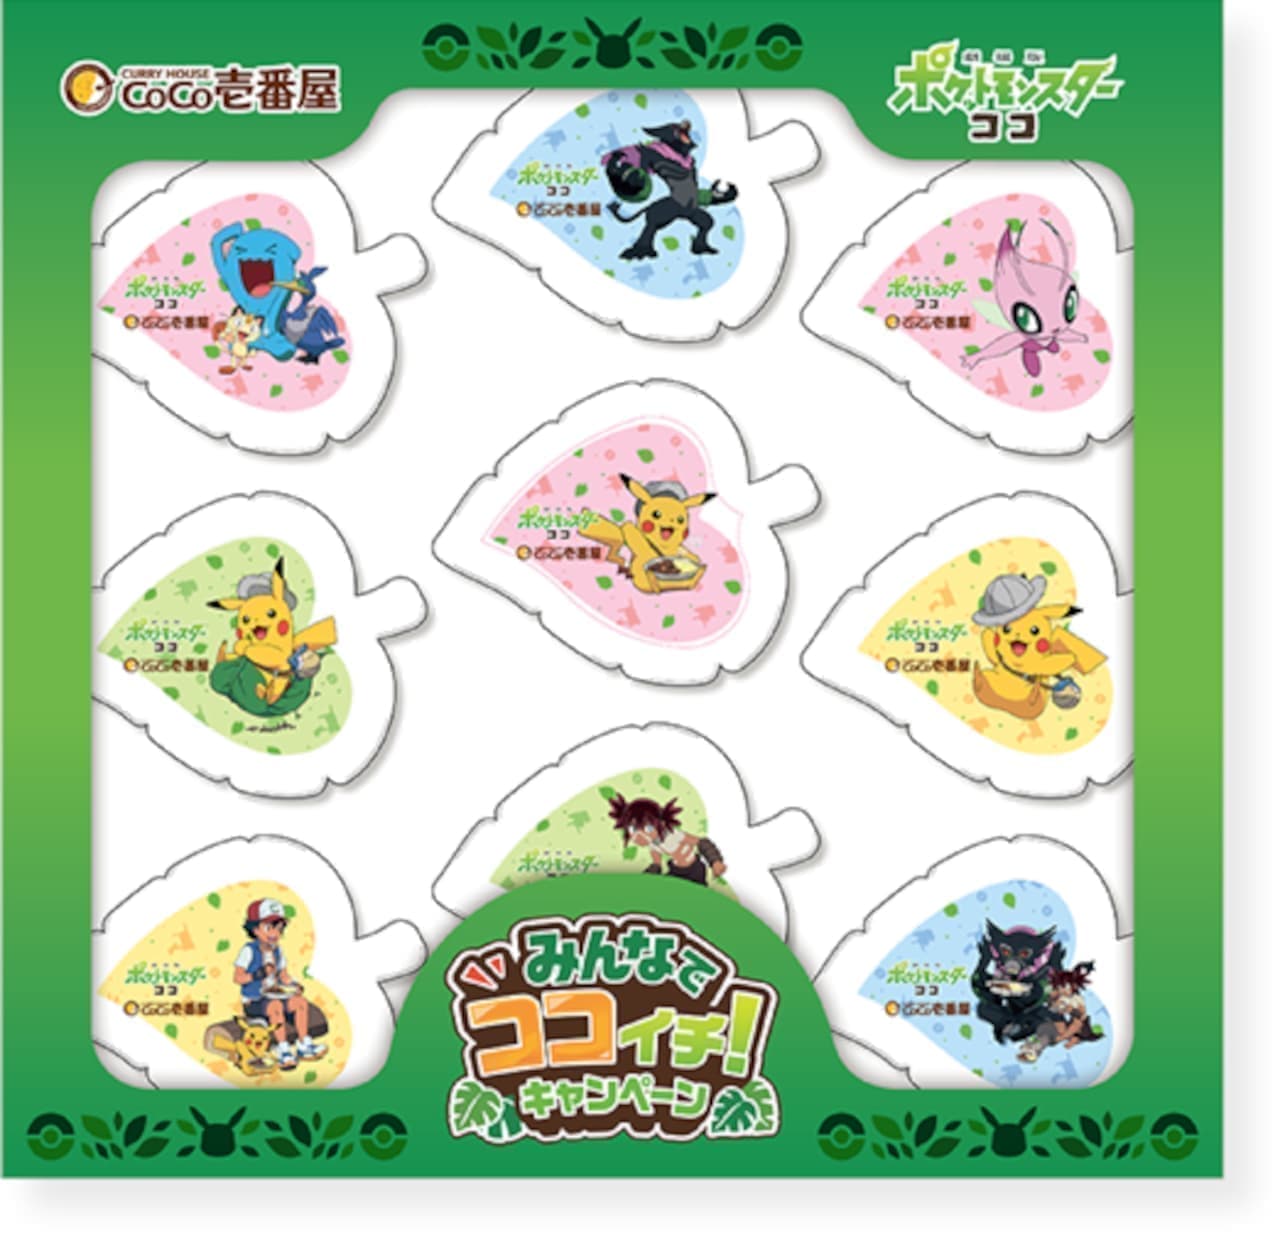 CoCo Ichibanya "Theatrical Version Pocket Monsters Coco" Campaign